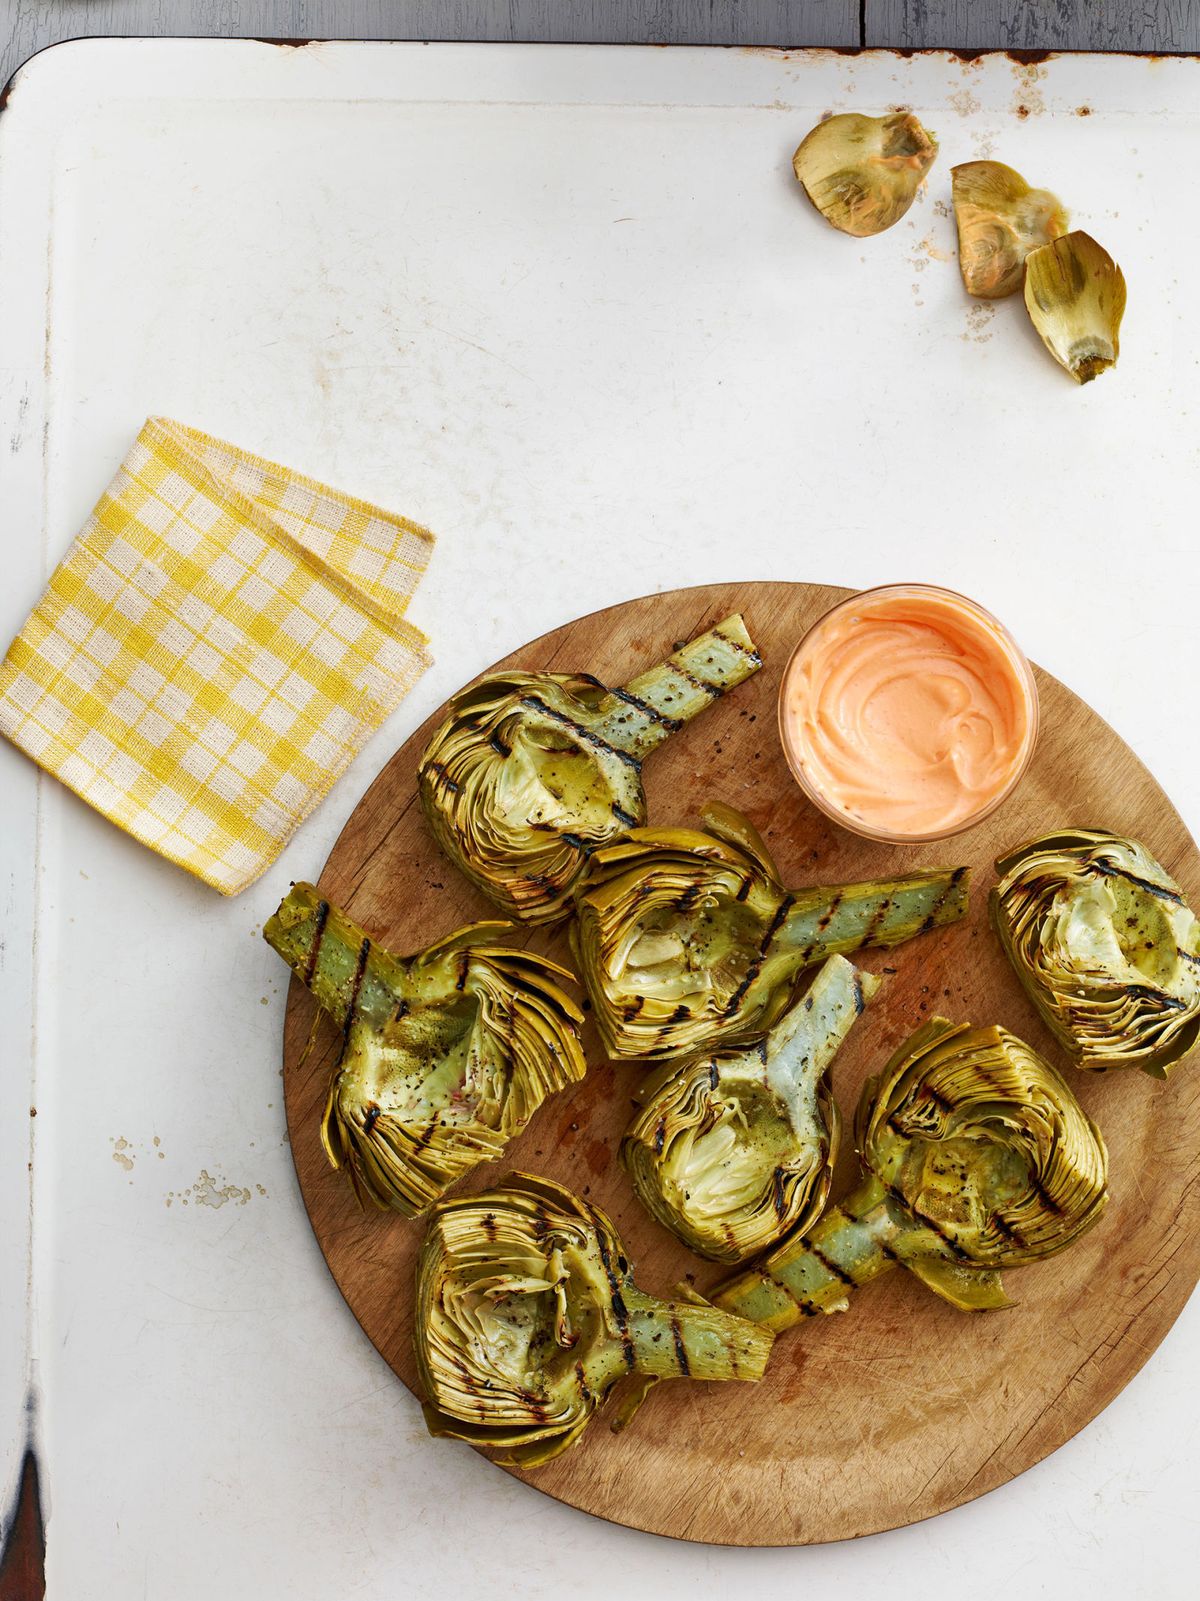 grilled artichokes with harissa honey dip